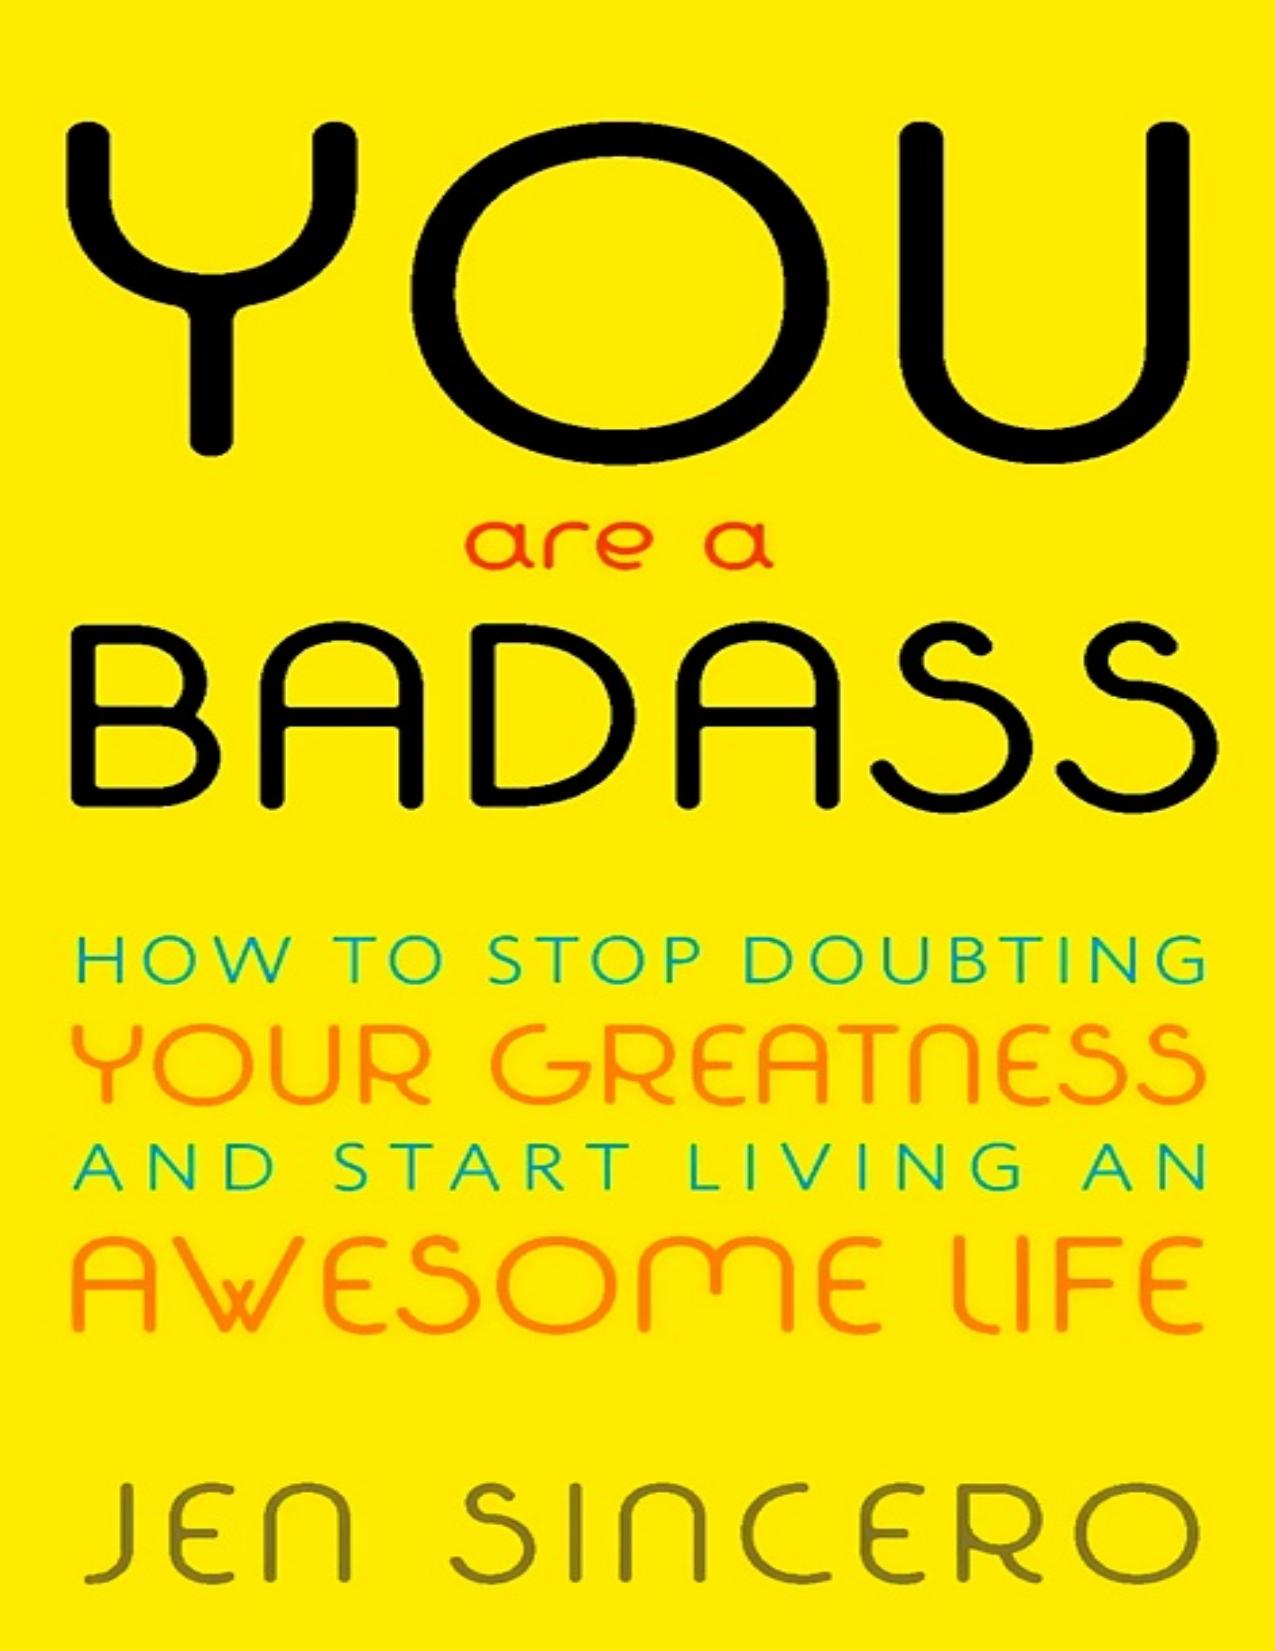 You Are a Badass: How to Stop Doubting Your Greatness and Start Living an Awesome Life by Jen Sincero